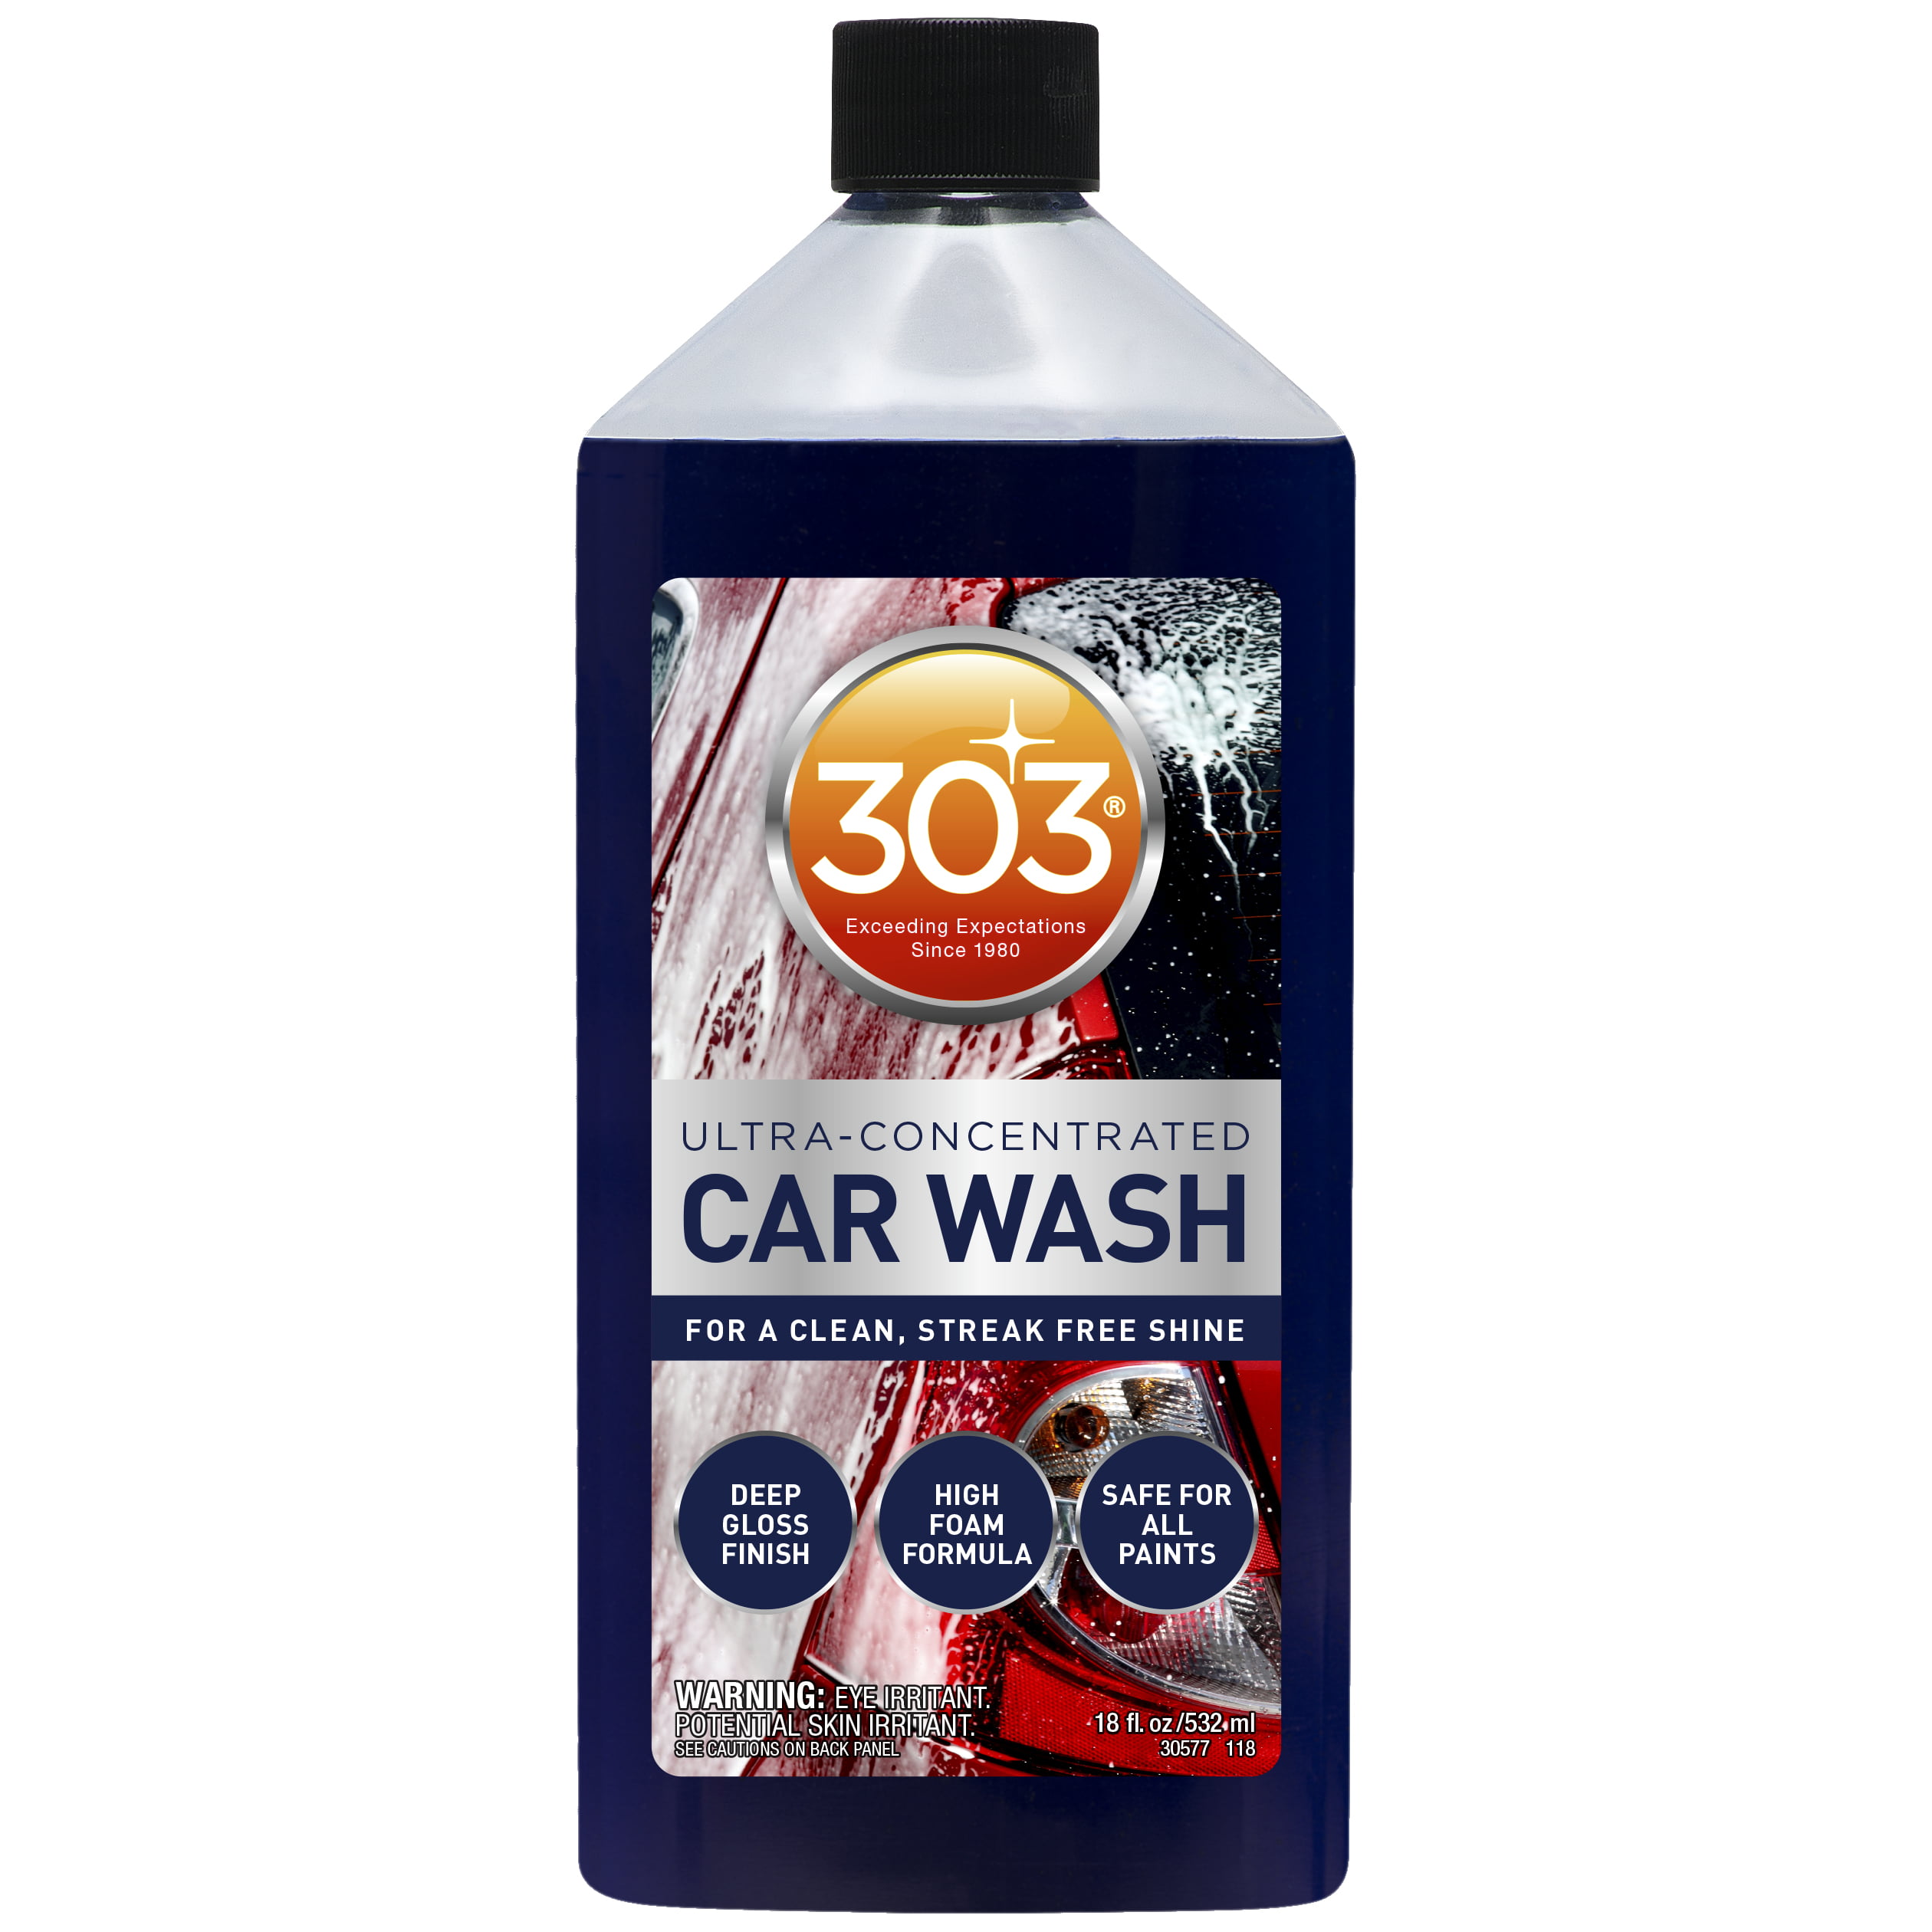 What Type of Car Wash is Best for Your Finish?